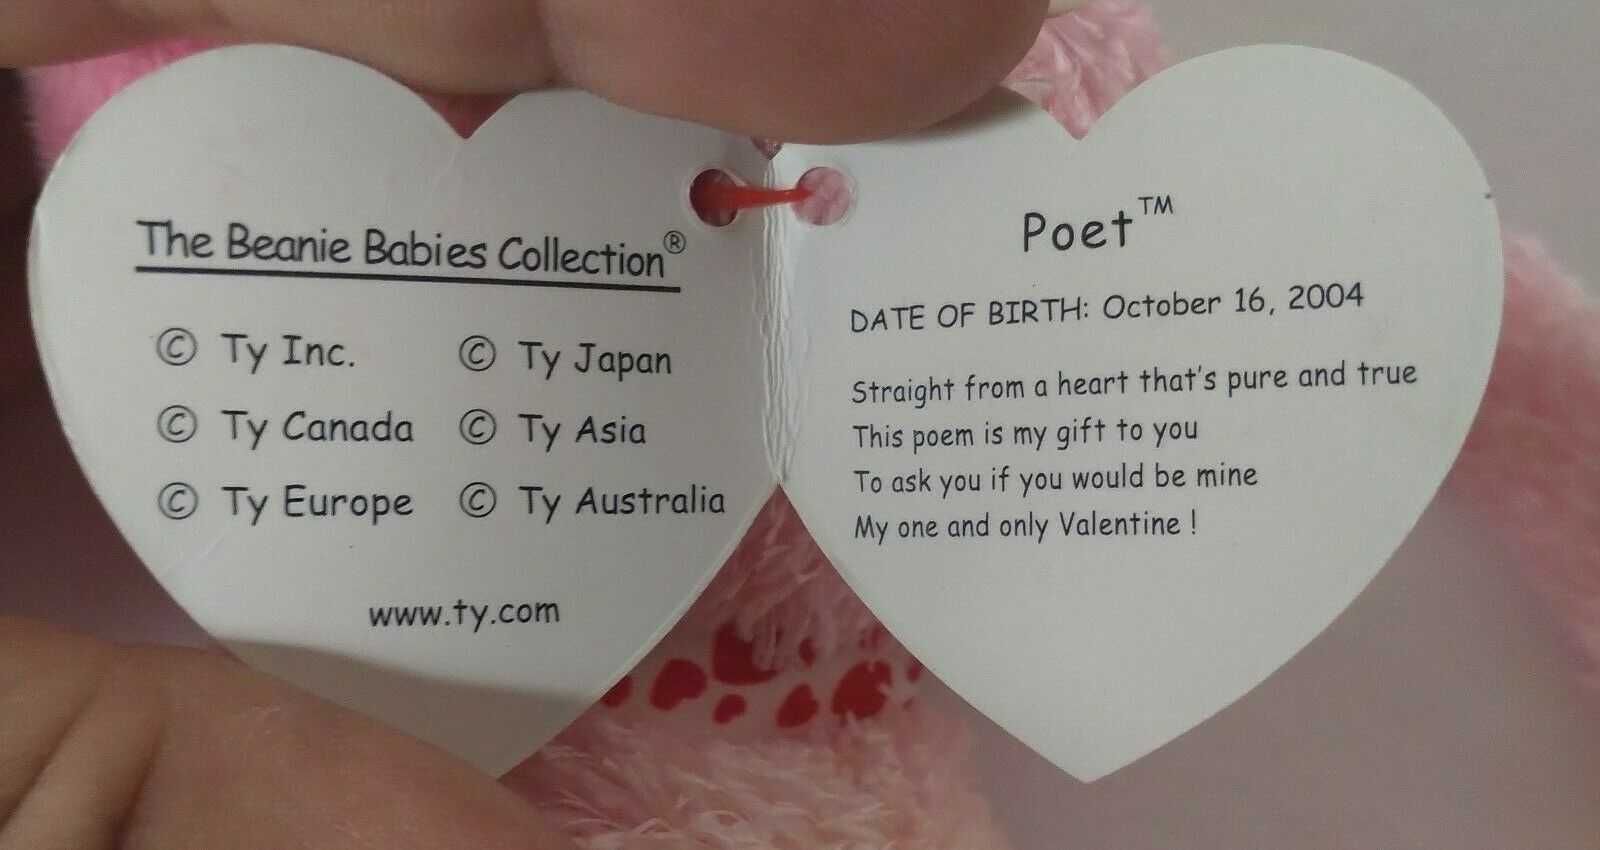 A photo of the Poet Beanie Baby Tag Poem